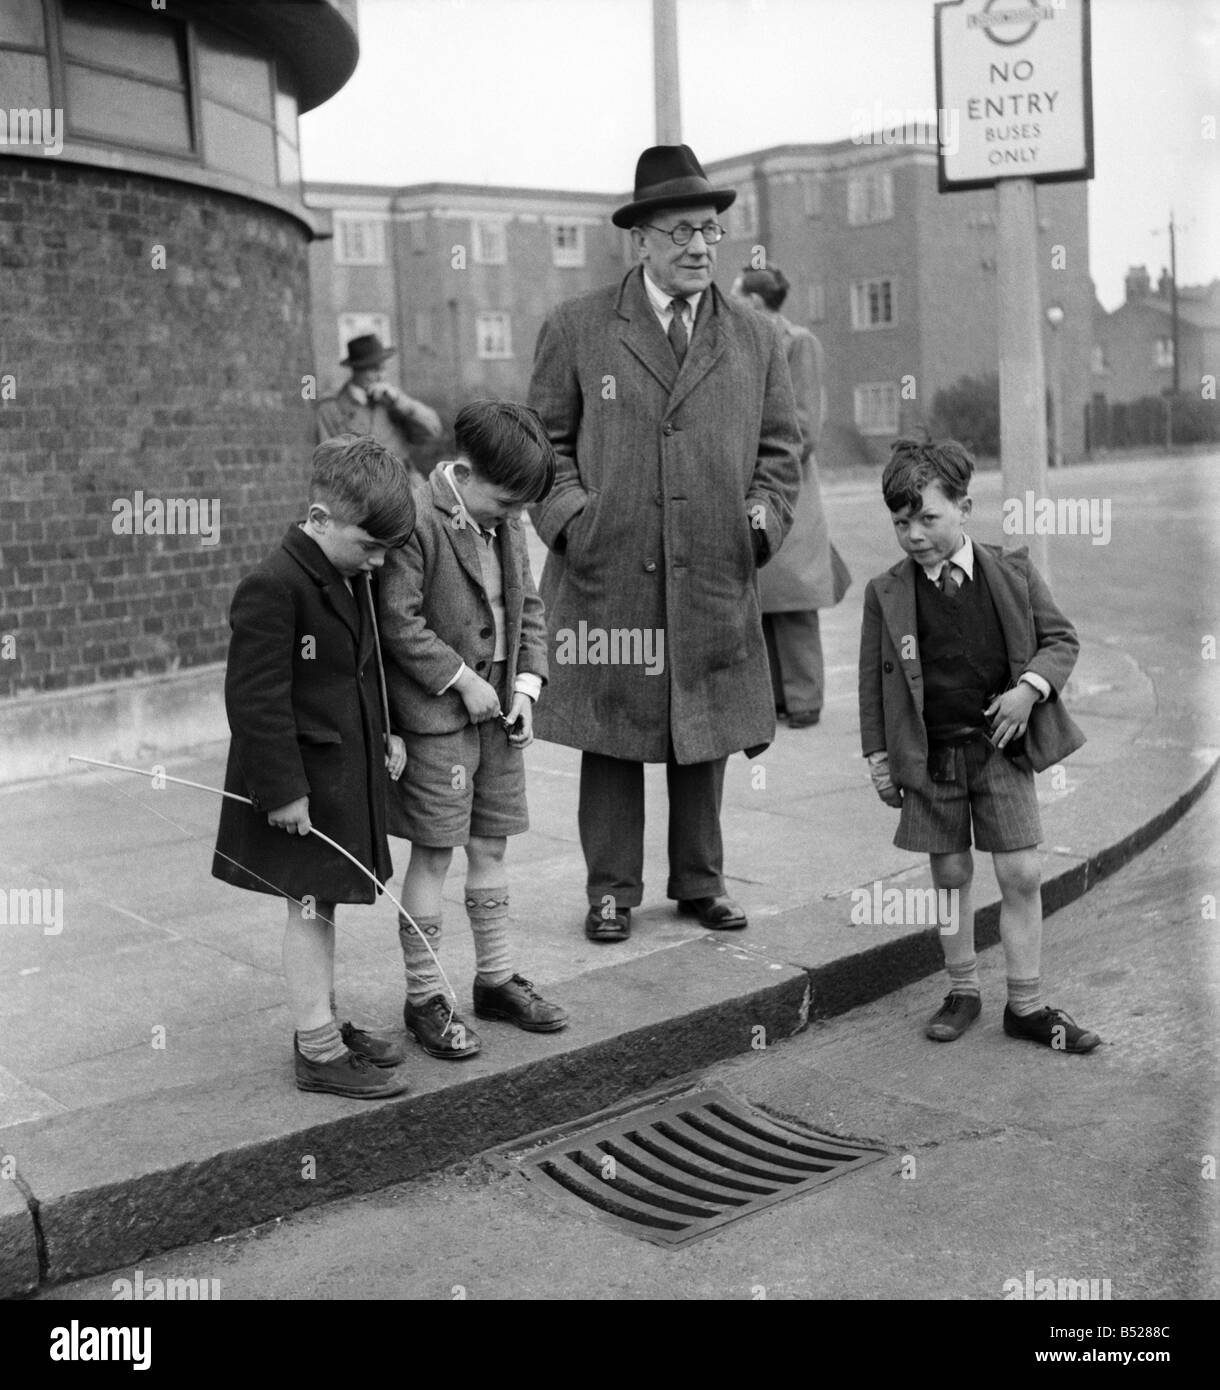 69 Years old Tommy Atkins of Palmers Green, North London, Keeps young by laughing-at his own jokes. Mr Atkins retired stage Ventriloquist spends odd moments throwing his voice down drains, behind looked doors, or inside large panels. Passers-by are amazed when they hear faint faraway cries of 'Let me out'. April 1953 D2163 Stock Photo